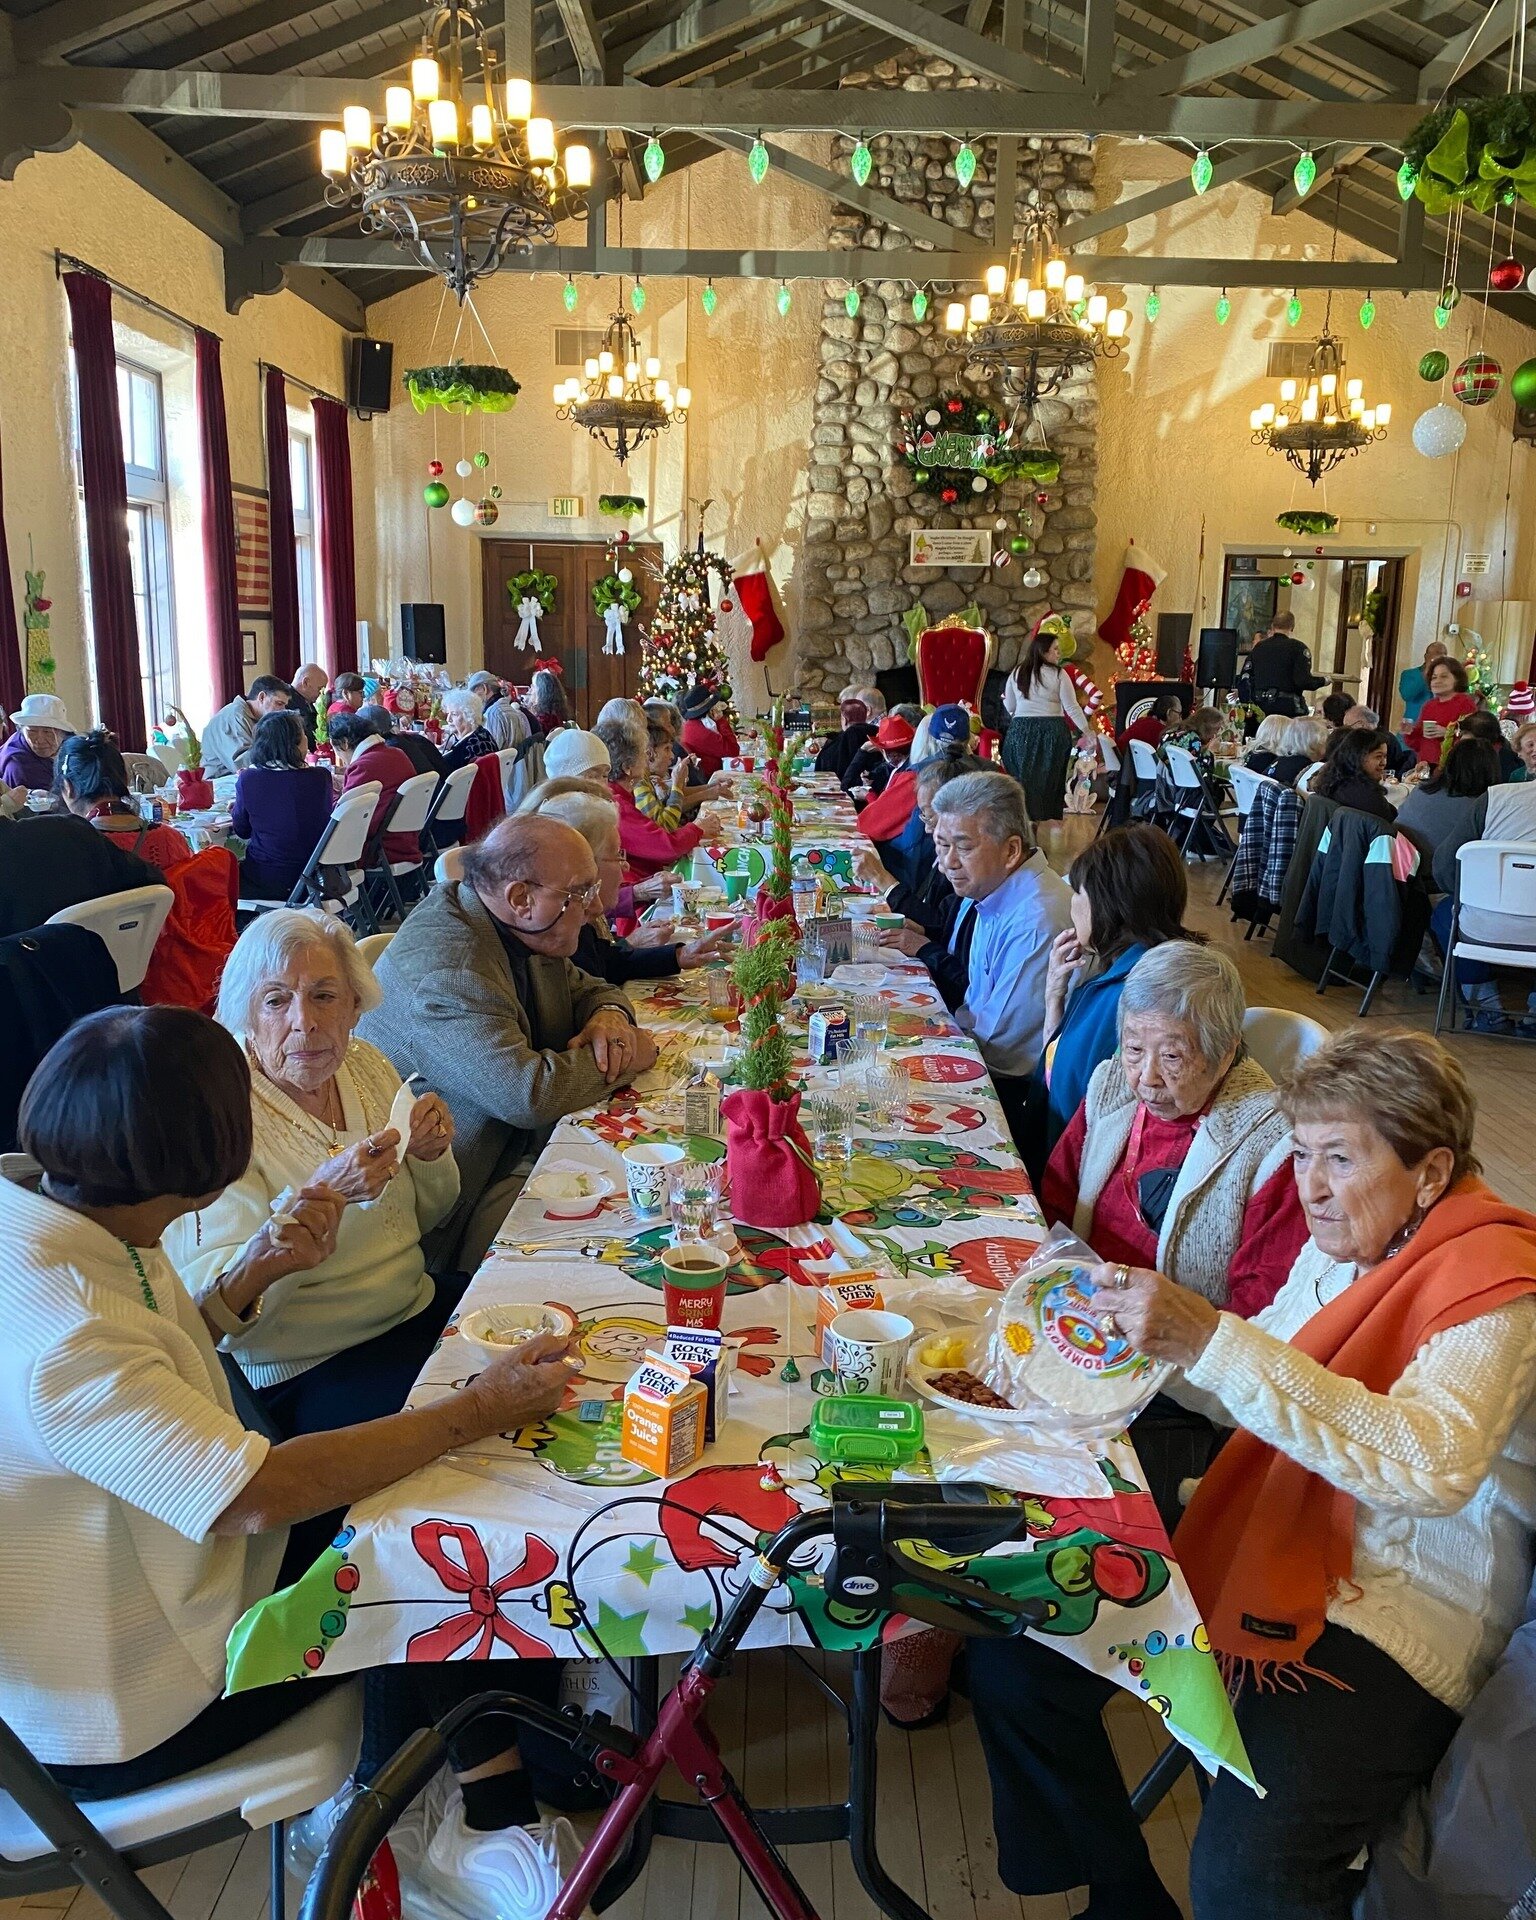 The South Pasadena Senior Center hosted a festive Holiday Luncheon with help from the South Pasadena Police Department , and of course South Pasadena Community Services! Pass the cookies, please! 🎅🎄🌟🕎

#SeniorServices #mydayinla #onlyinla #southp